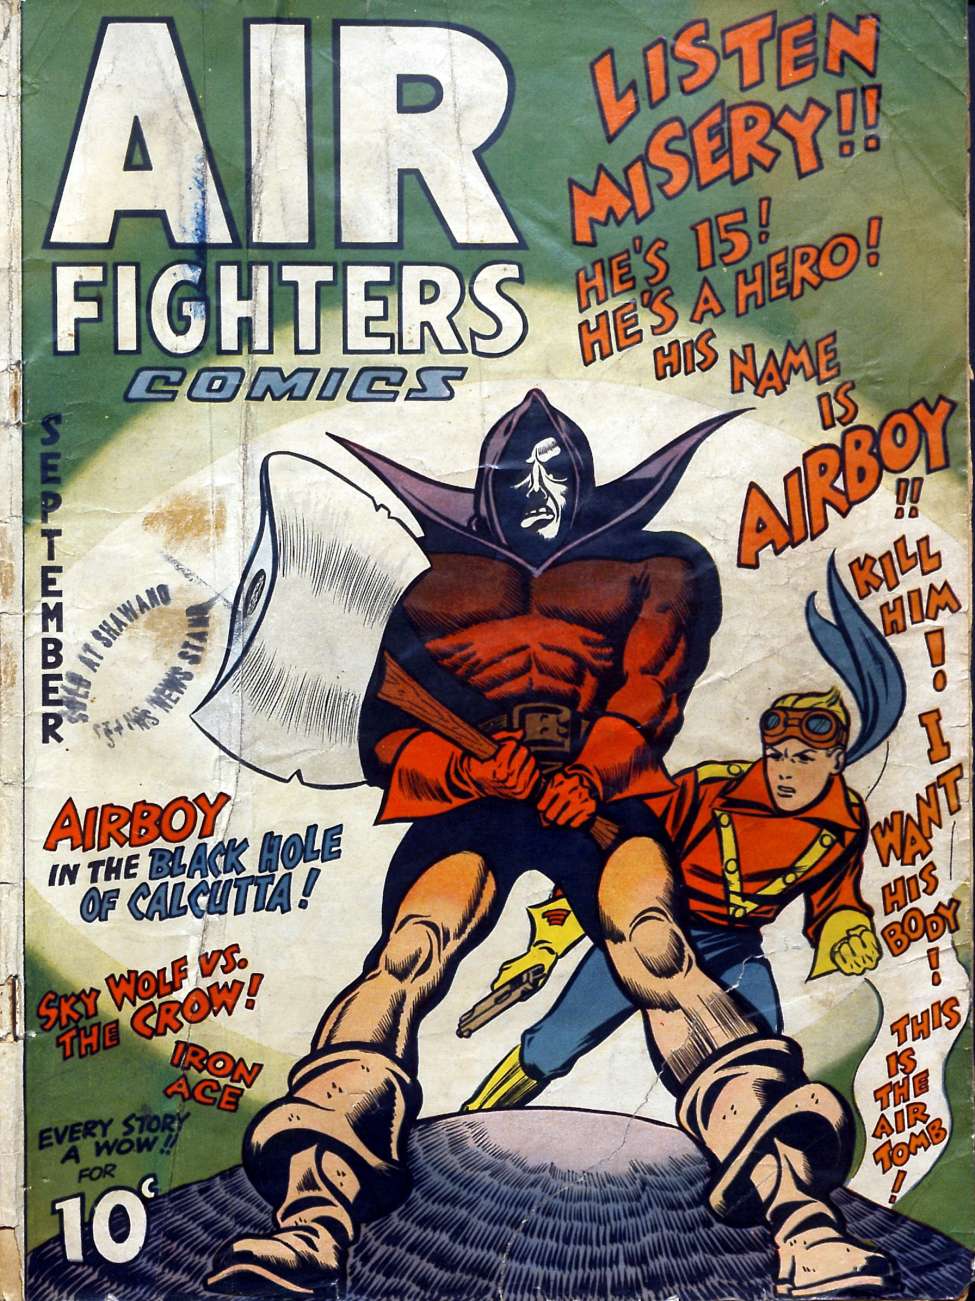 Book Cover For Air Fighters Comics v1 12 (alt) - Version 2